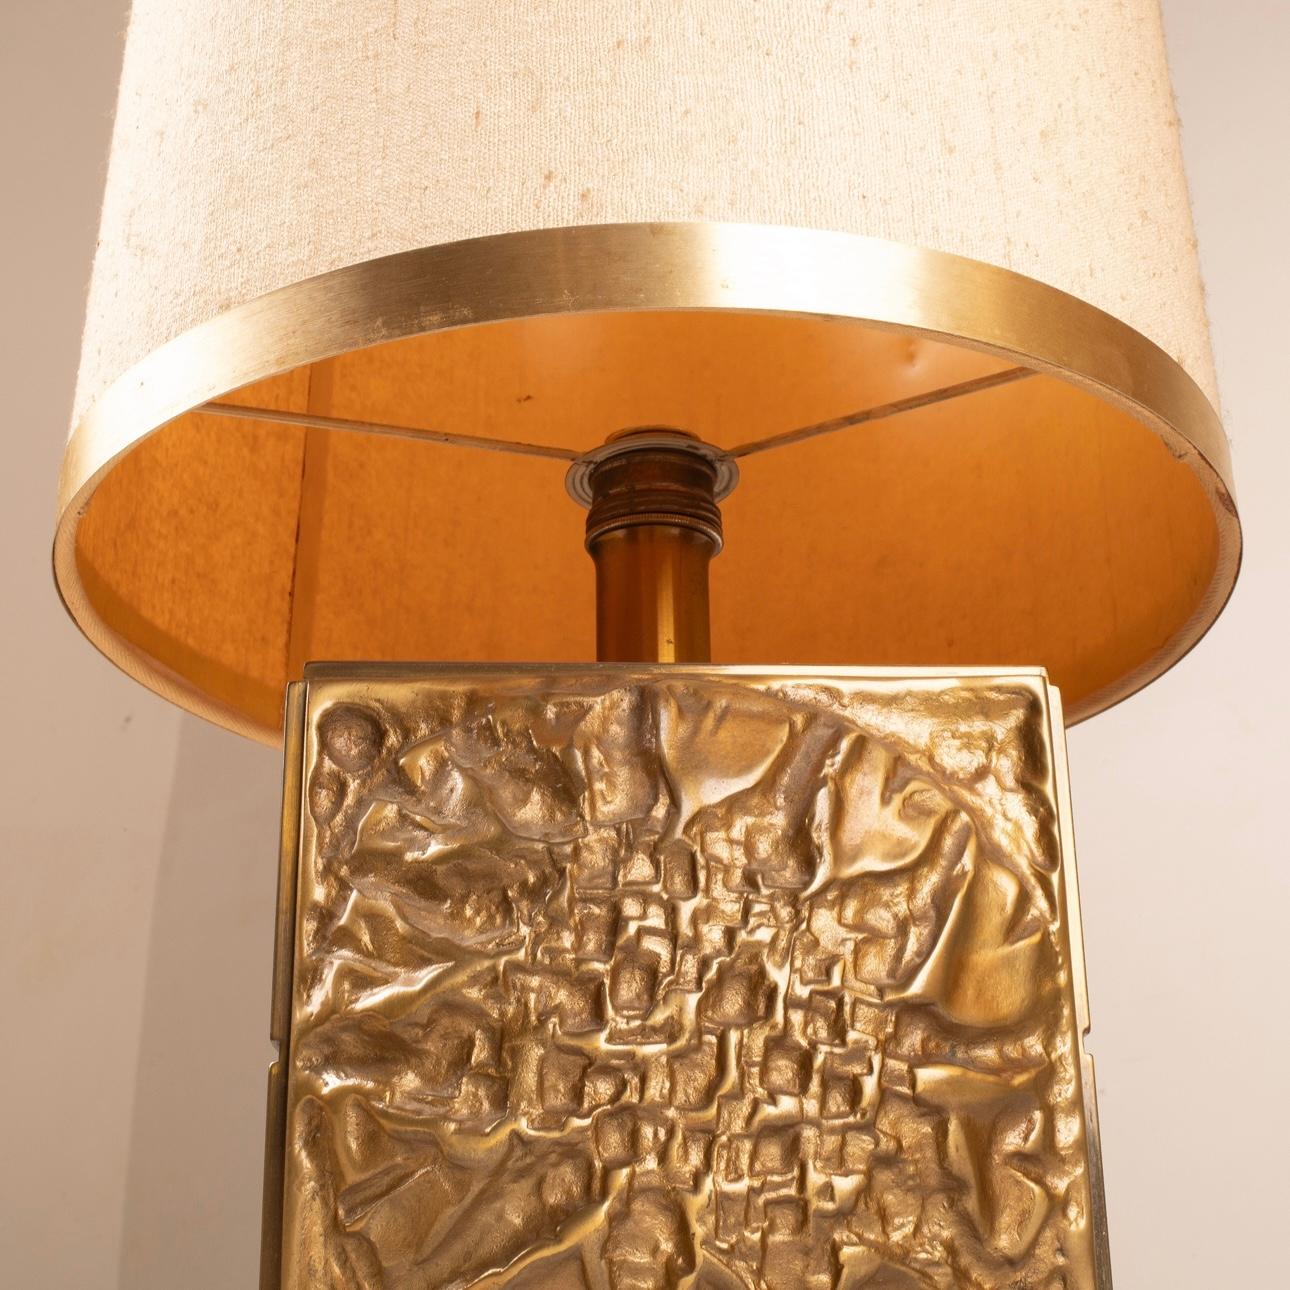 Extraordinary pair of cast brass table lamps with a striking Brutalist design, signed by renowned designer Luciano Frigerio for the illustrious Frigerio brand of Desio in the 1970s.
These lamps, in impeccable condition, still retain their original